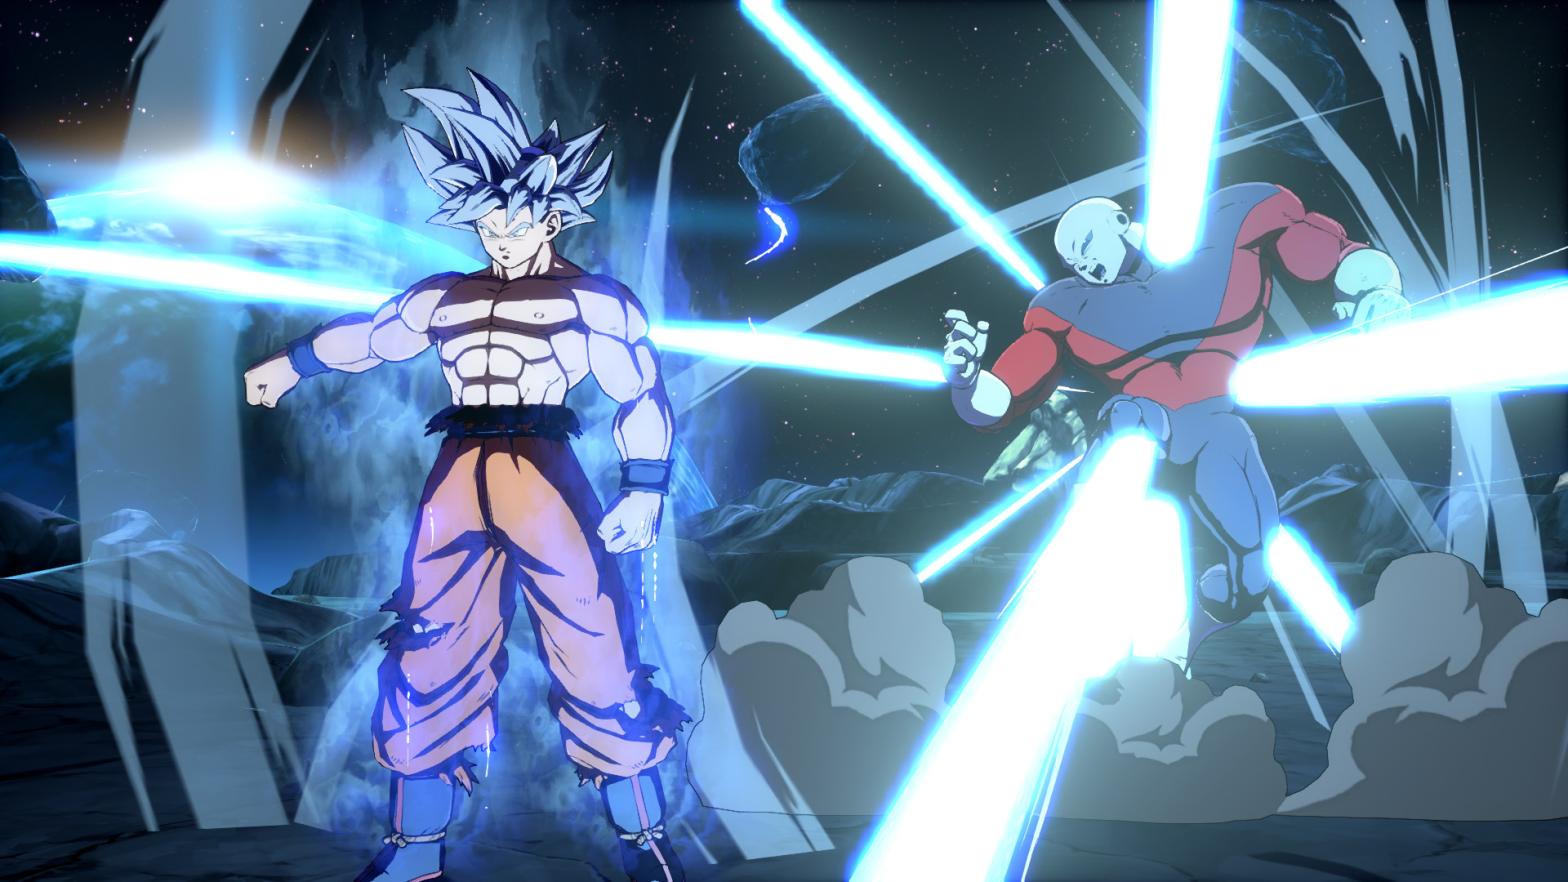 Poor Jiren disconnected from one too many online matches. (Screenshot: Bandai Namco)